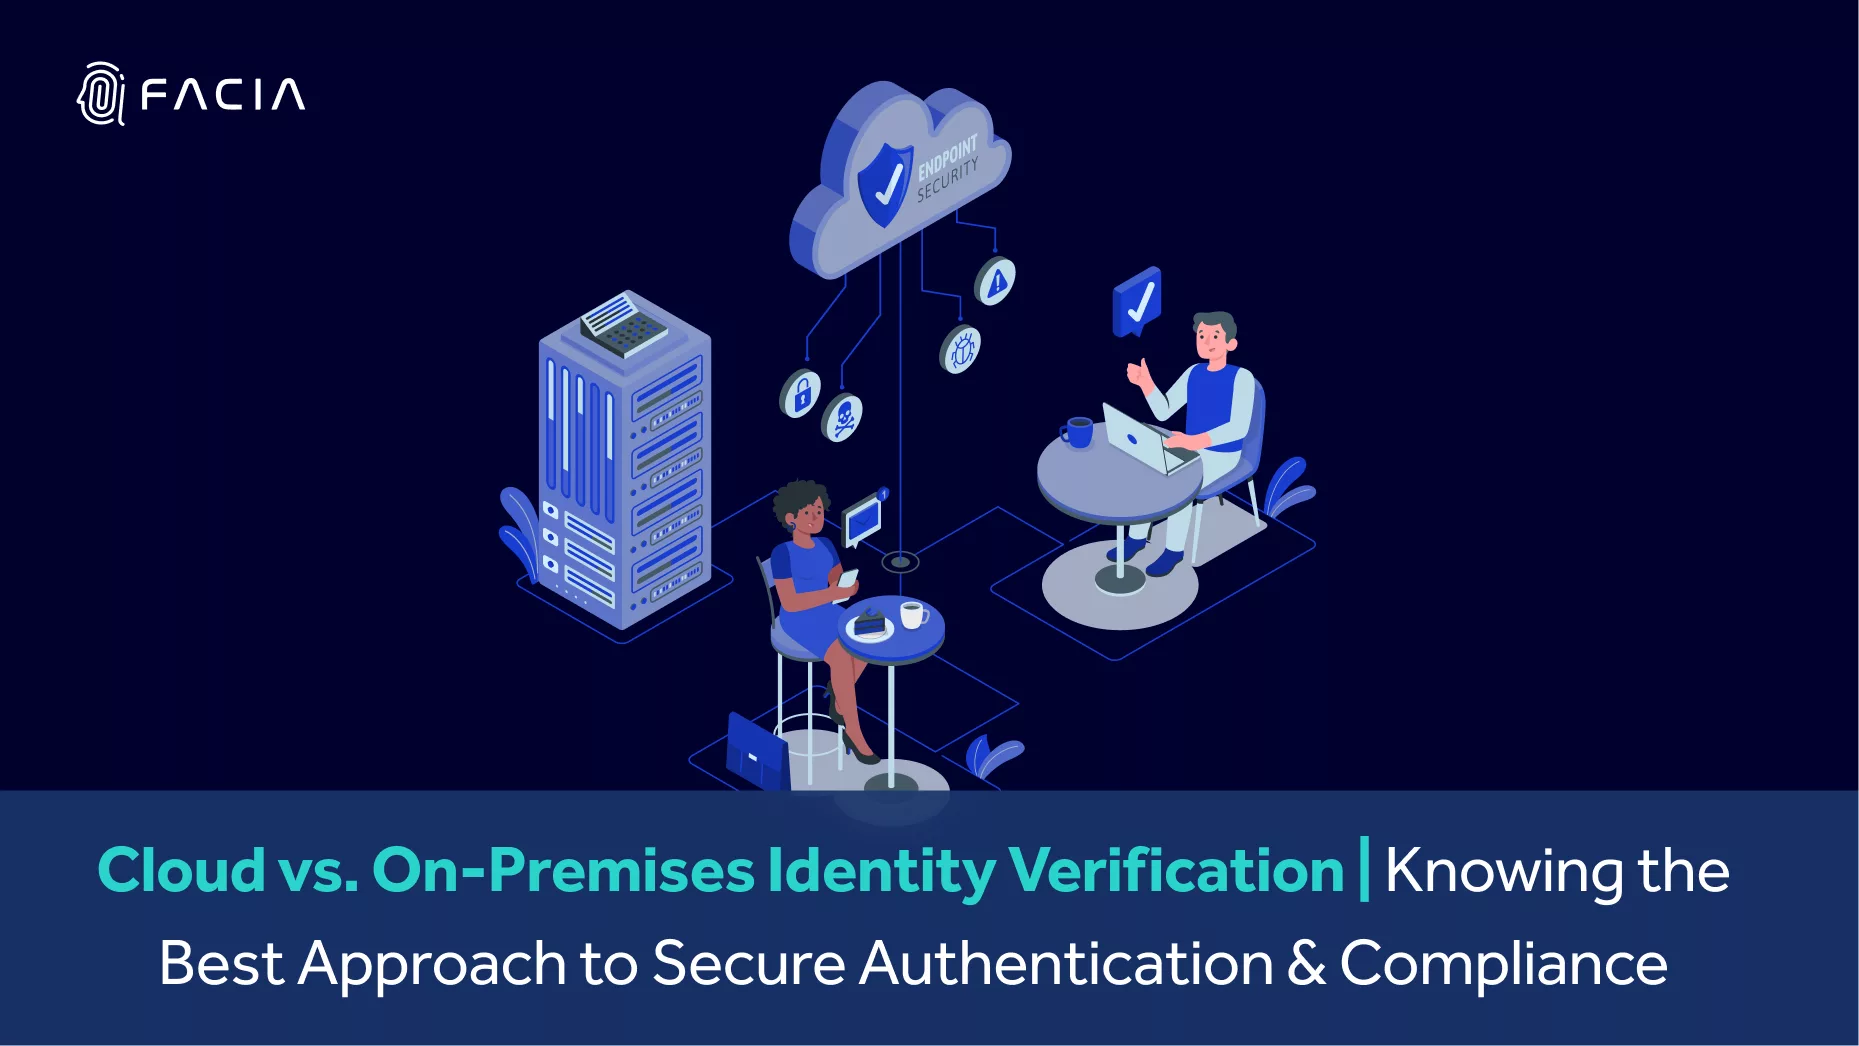 Cloud vs. On-Premises Identity Verification: Knowing the Best Approach to Secure Authentication & Compliance